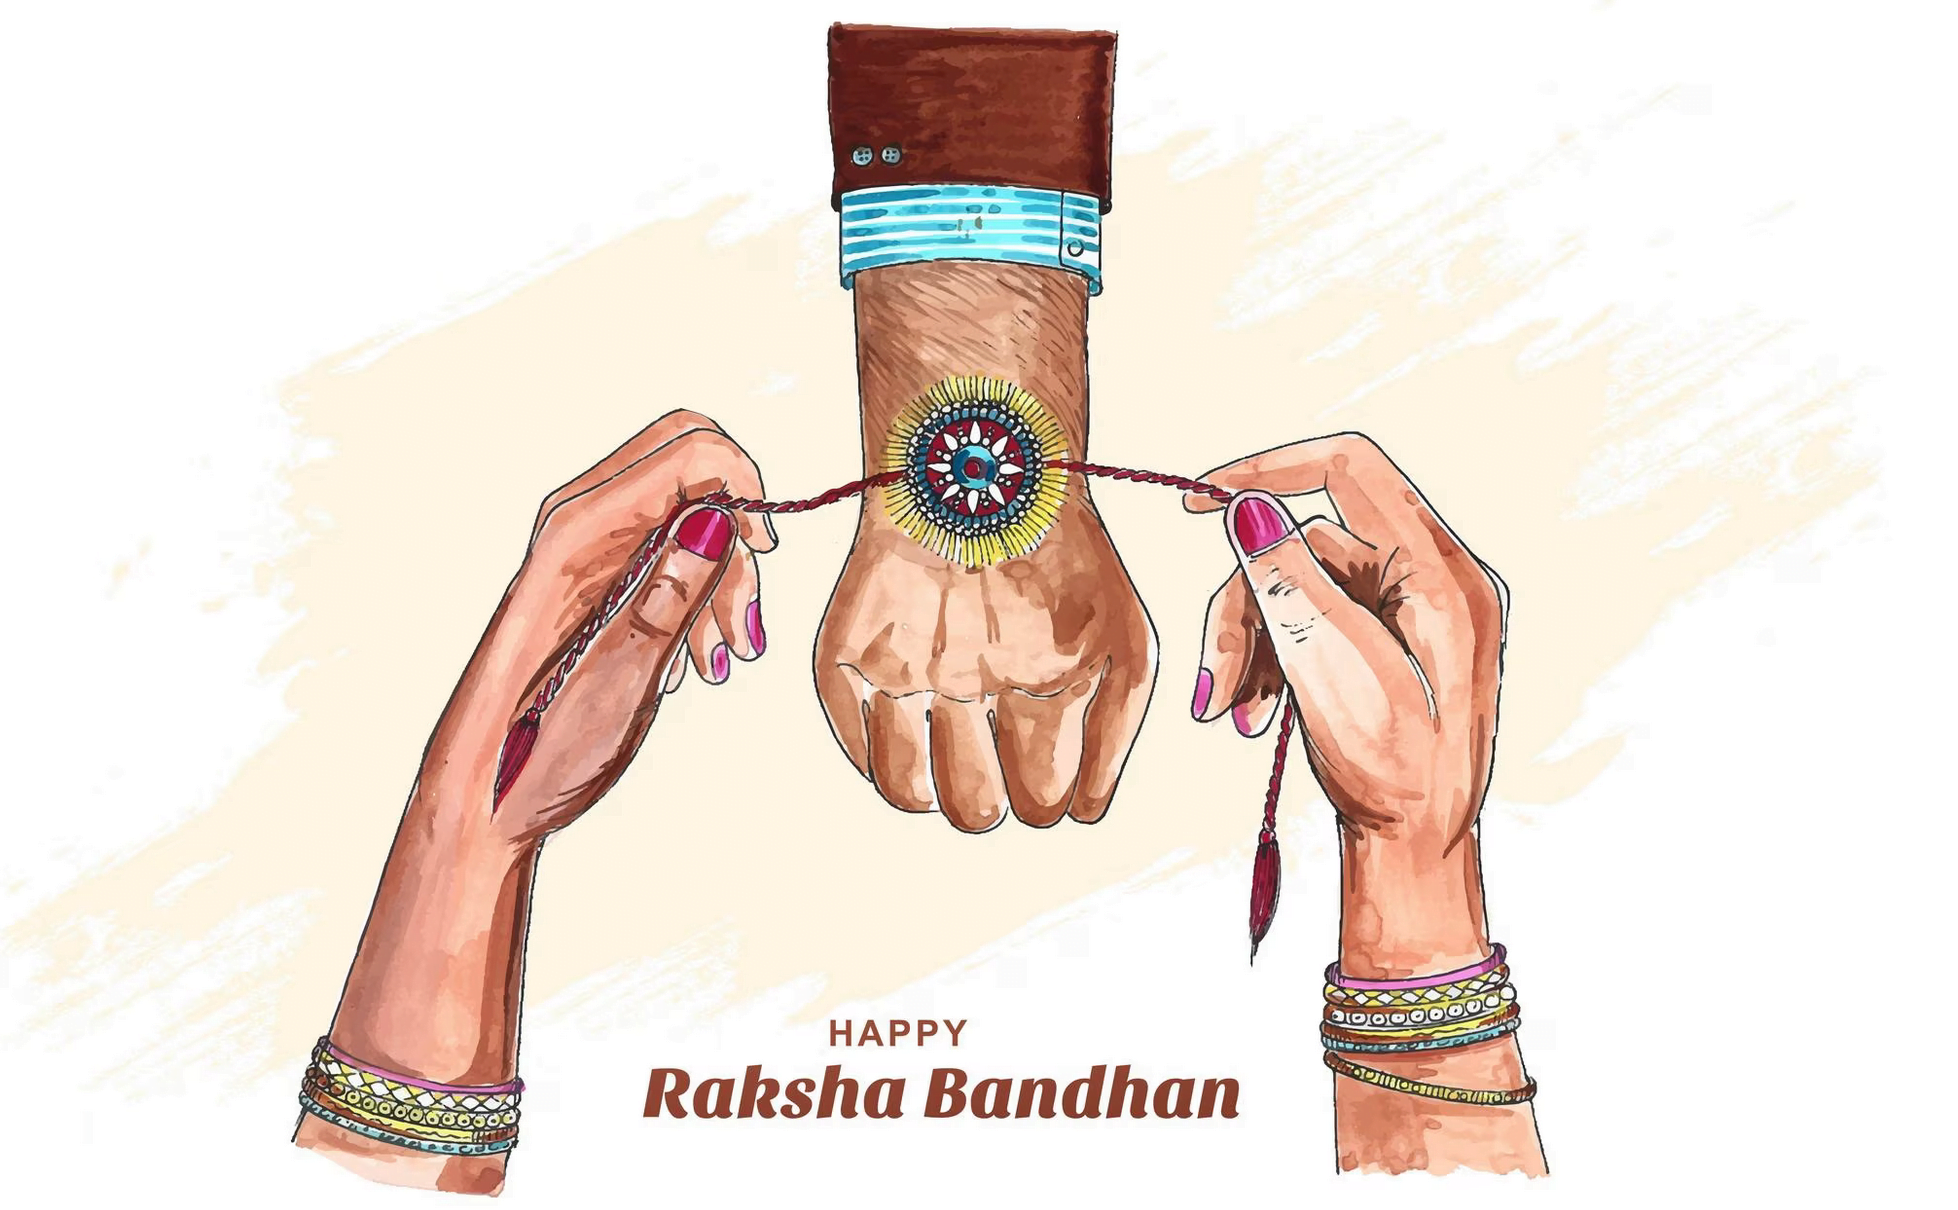 This Raksha Bandhan, don’t let the distance define your equation with your sibling